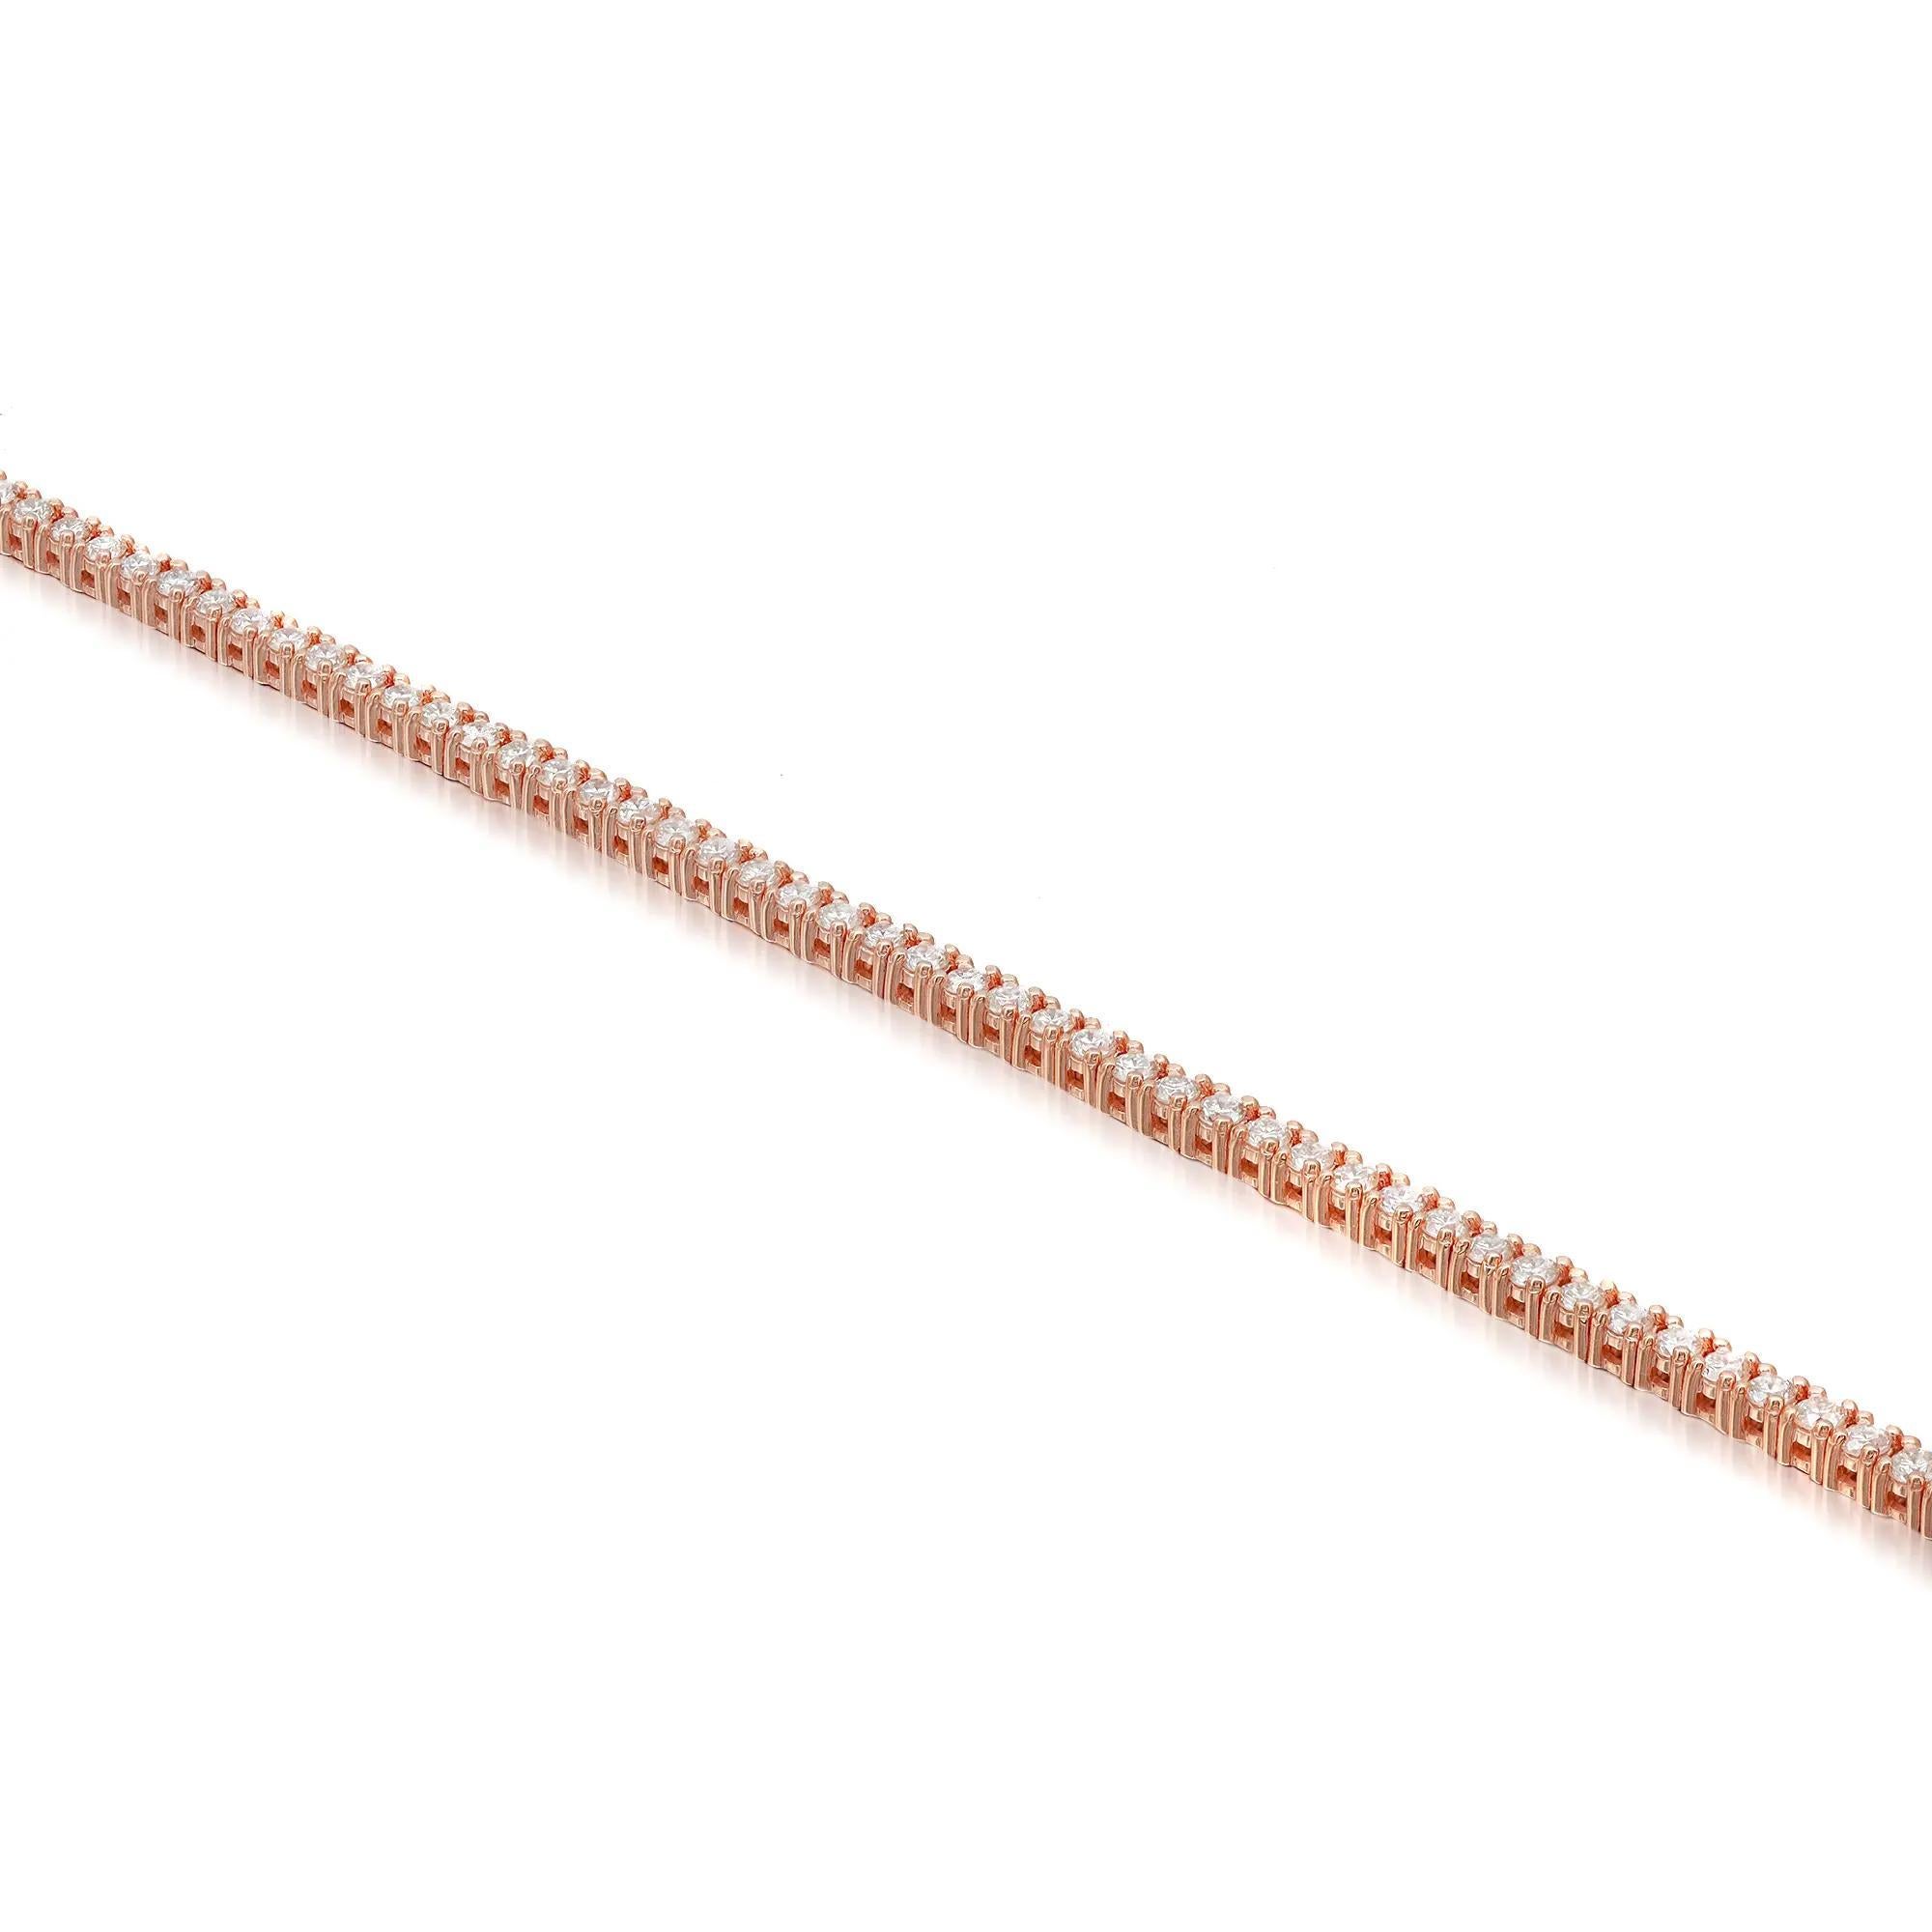 Prong Set Round Diamond Tennis Bracelet 14K Rose Gold 0.95Cttw 7 Inches In New Condition For Sale In New York, NY